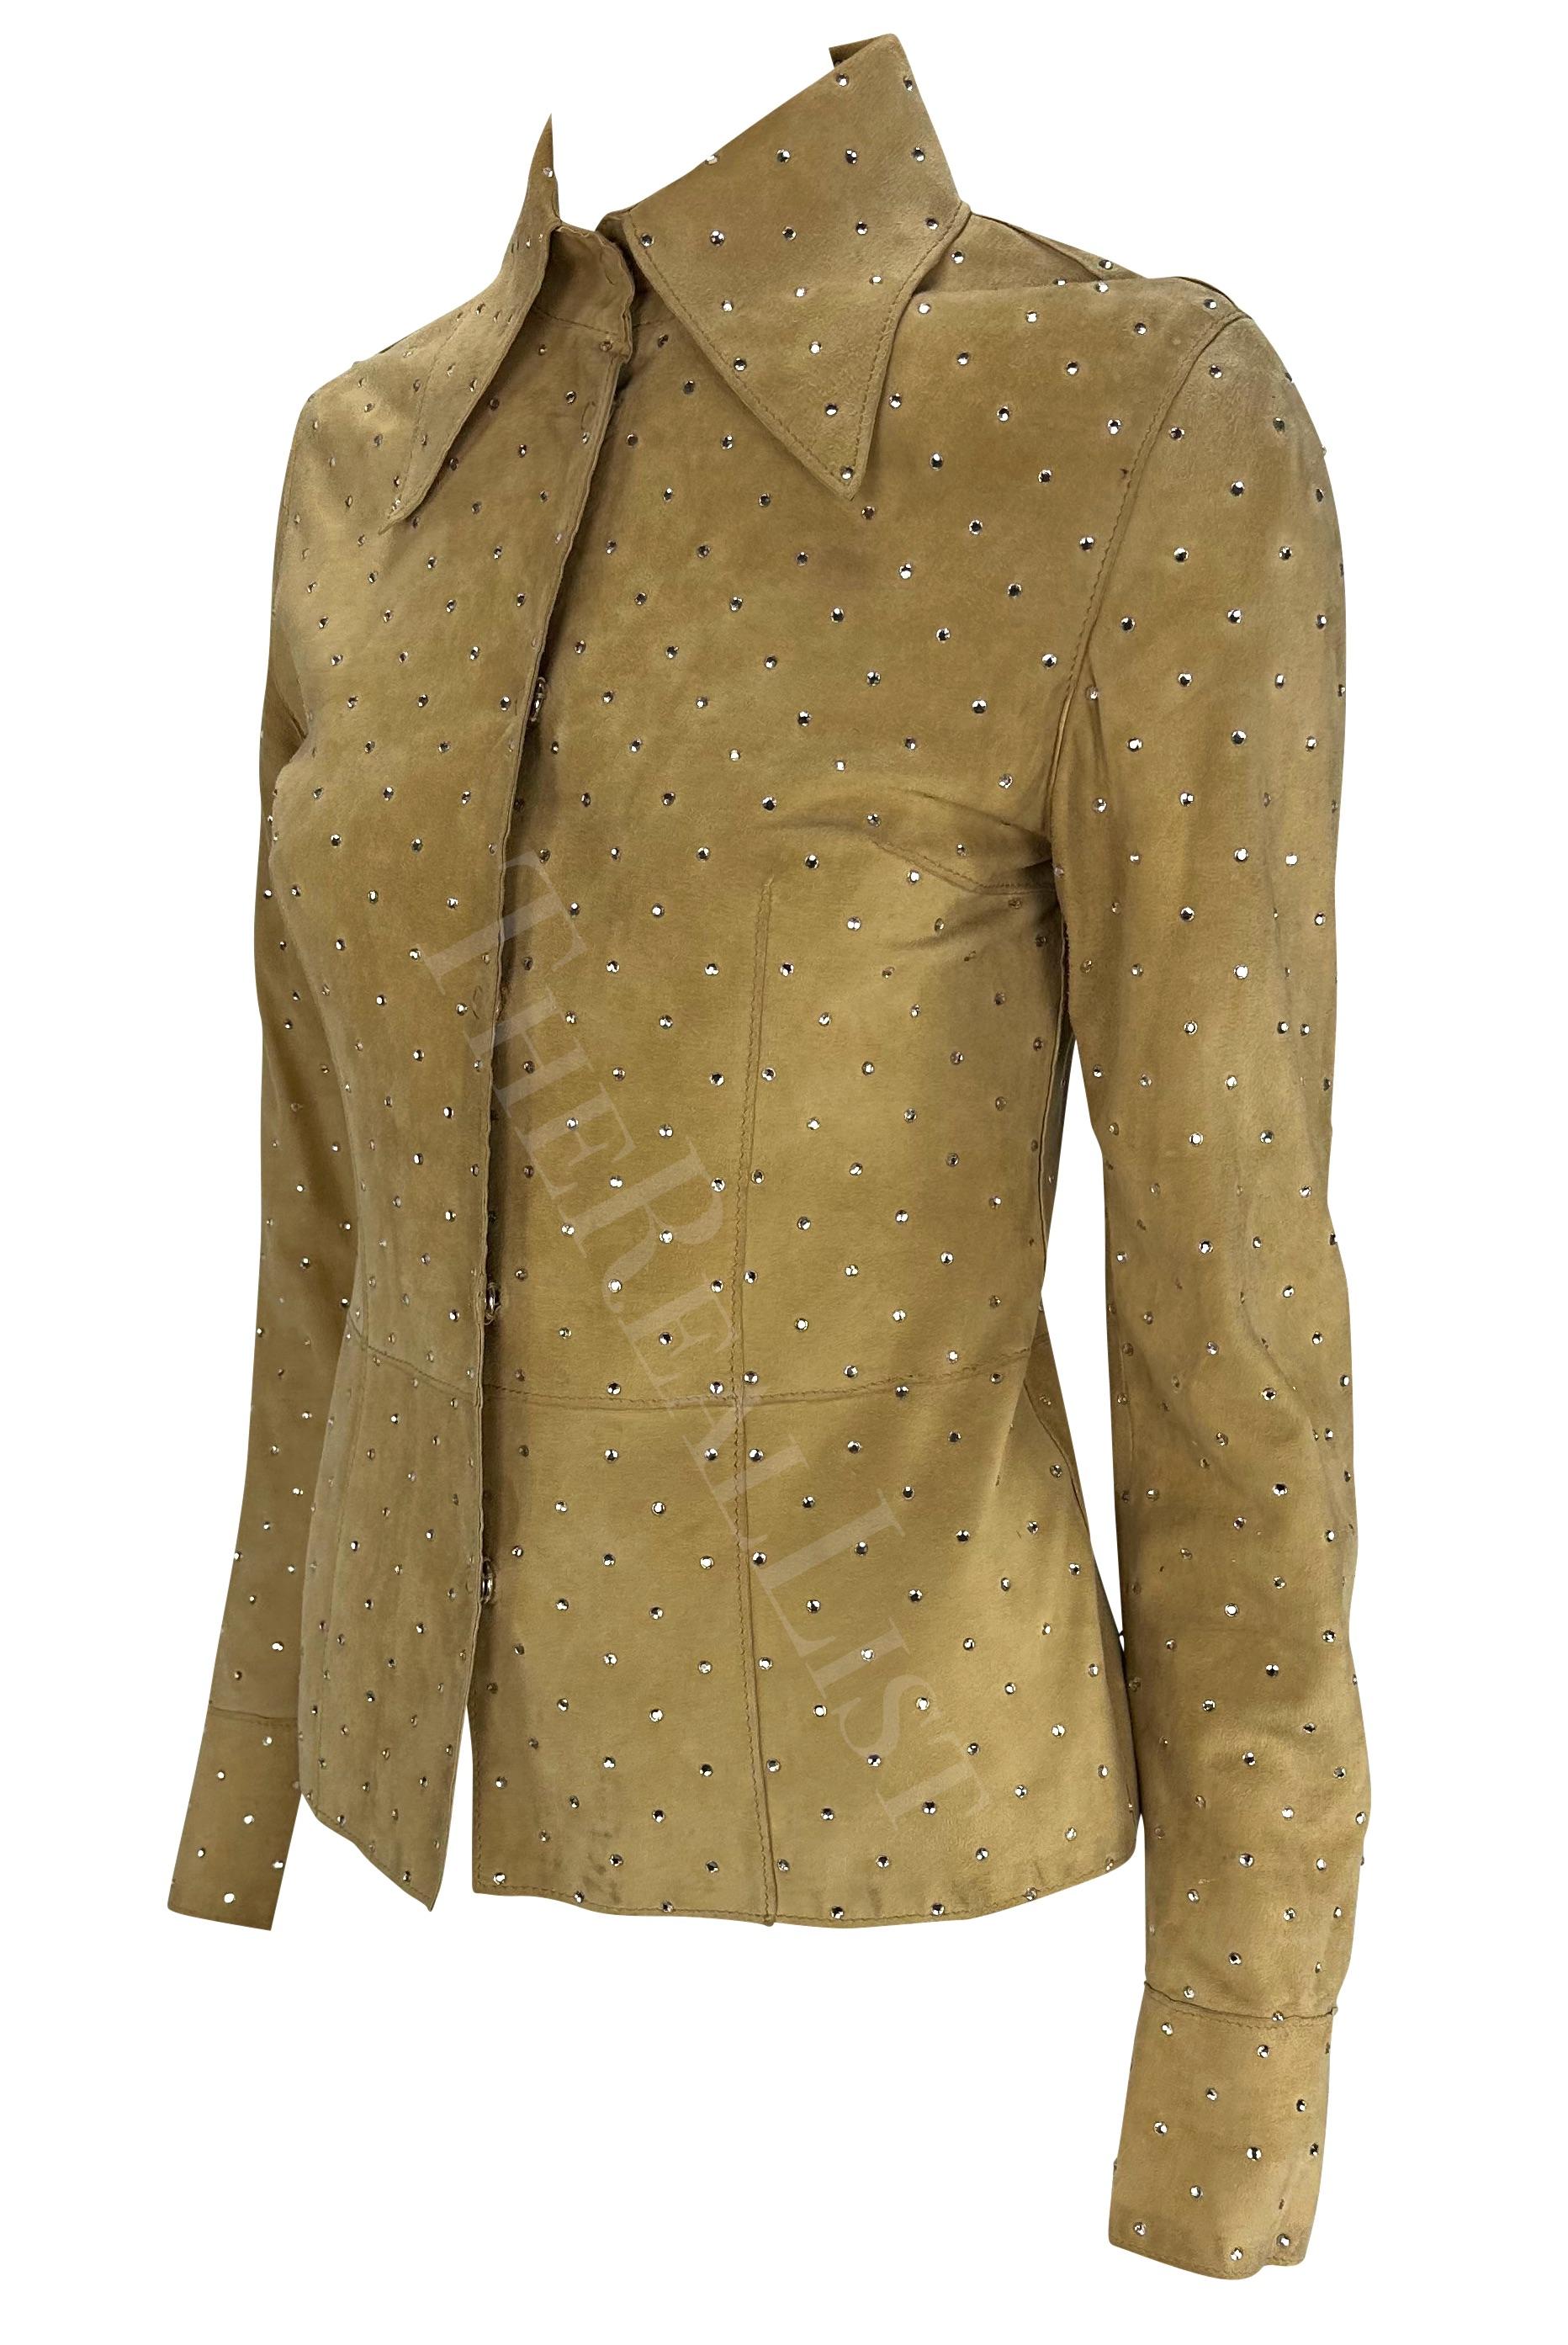 F/W 2000 Dolce & Gabbana Tan Suede Rhinestone Accented Shirt Jacket In Good Condition For Sale In West Hollywood, CA